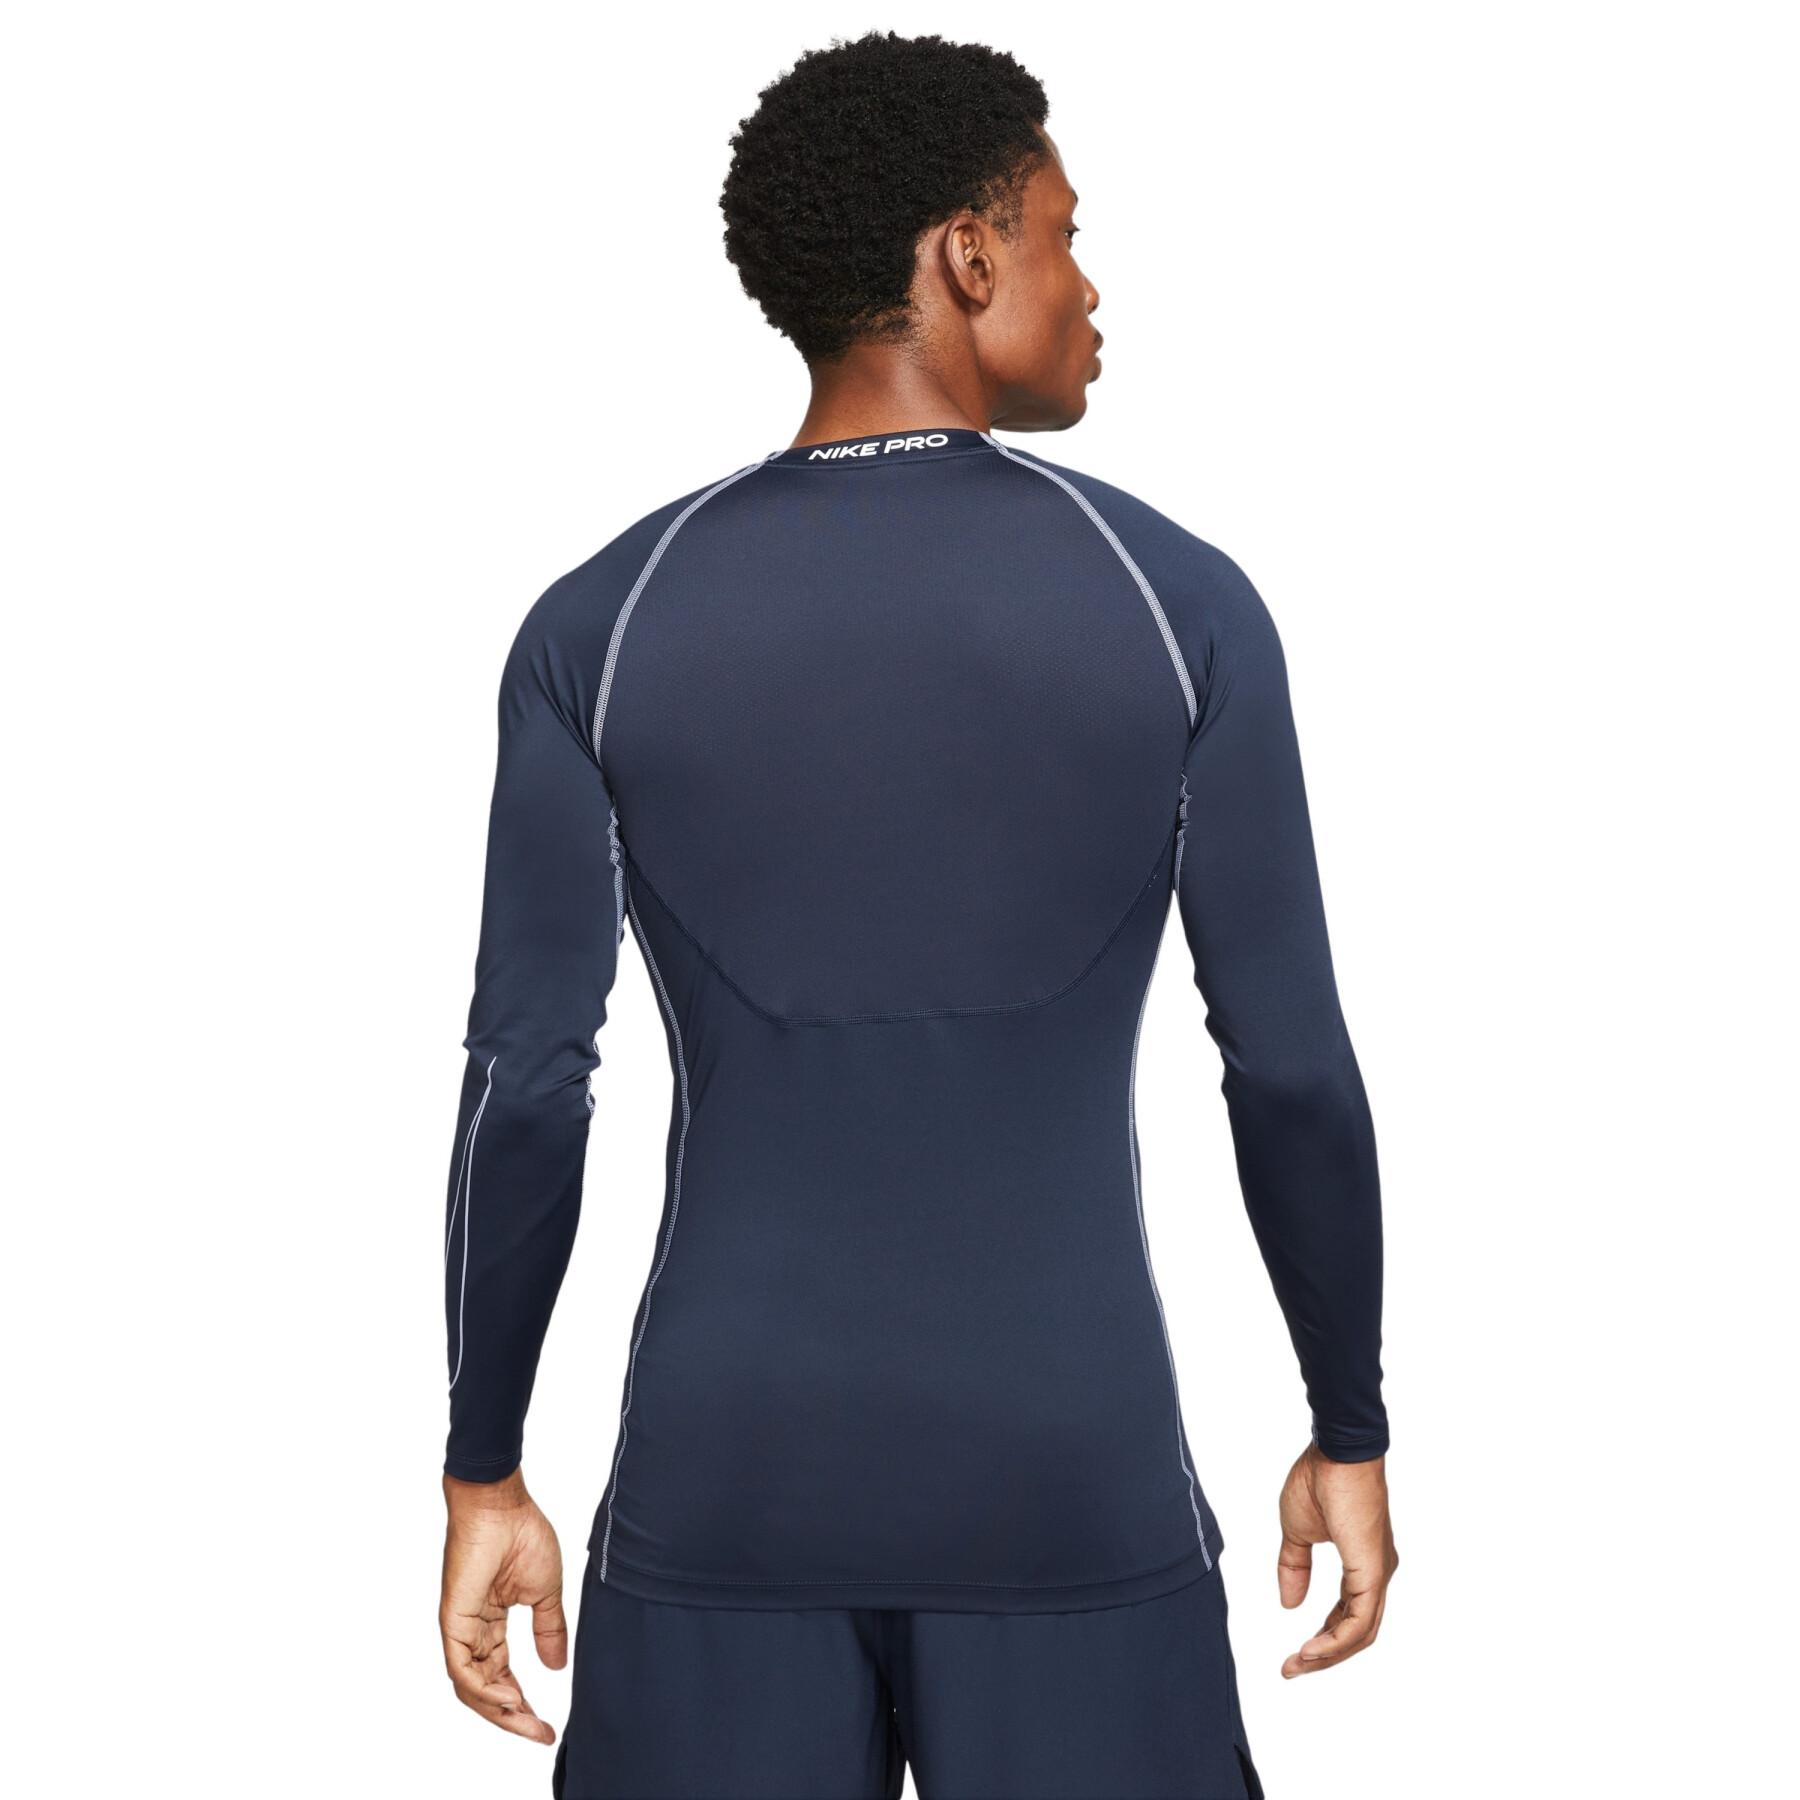 Long sleeve compression jersey Nike NP Dri-Fit